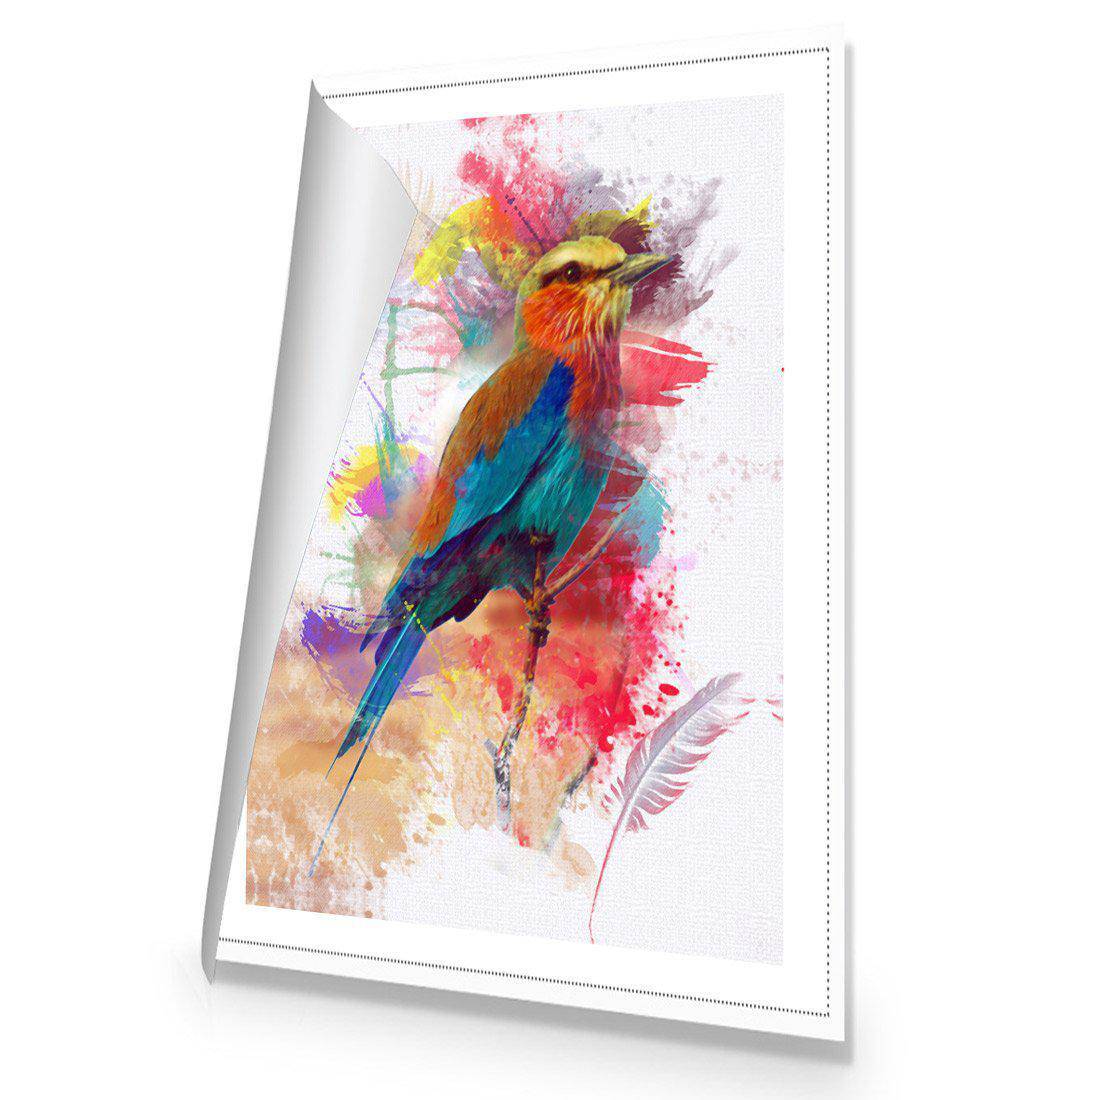 Painted Bird And Feathers Canvas Art-Canvas-Wall Art Designs-45x30cm-Rolled Canvas-Wall Art Designs